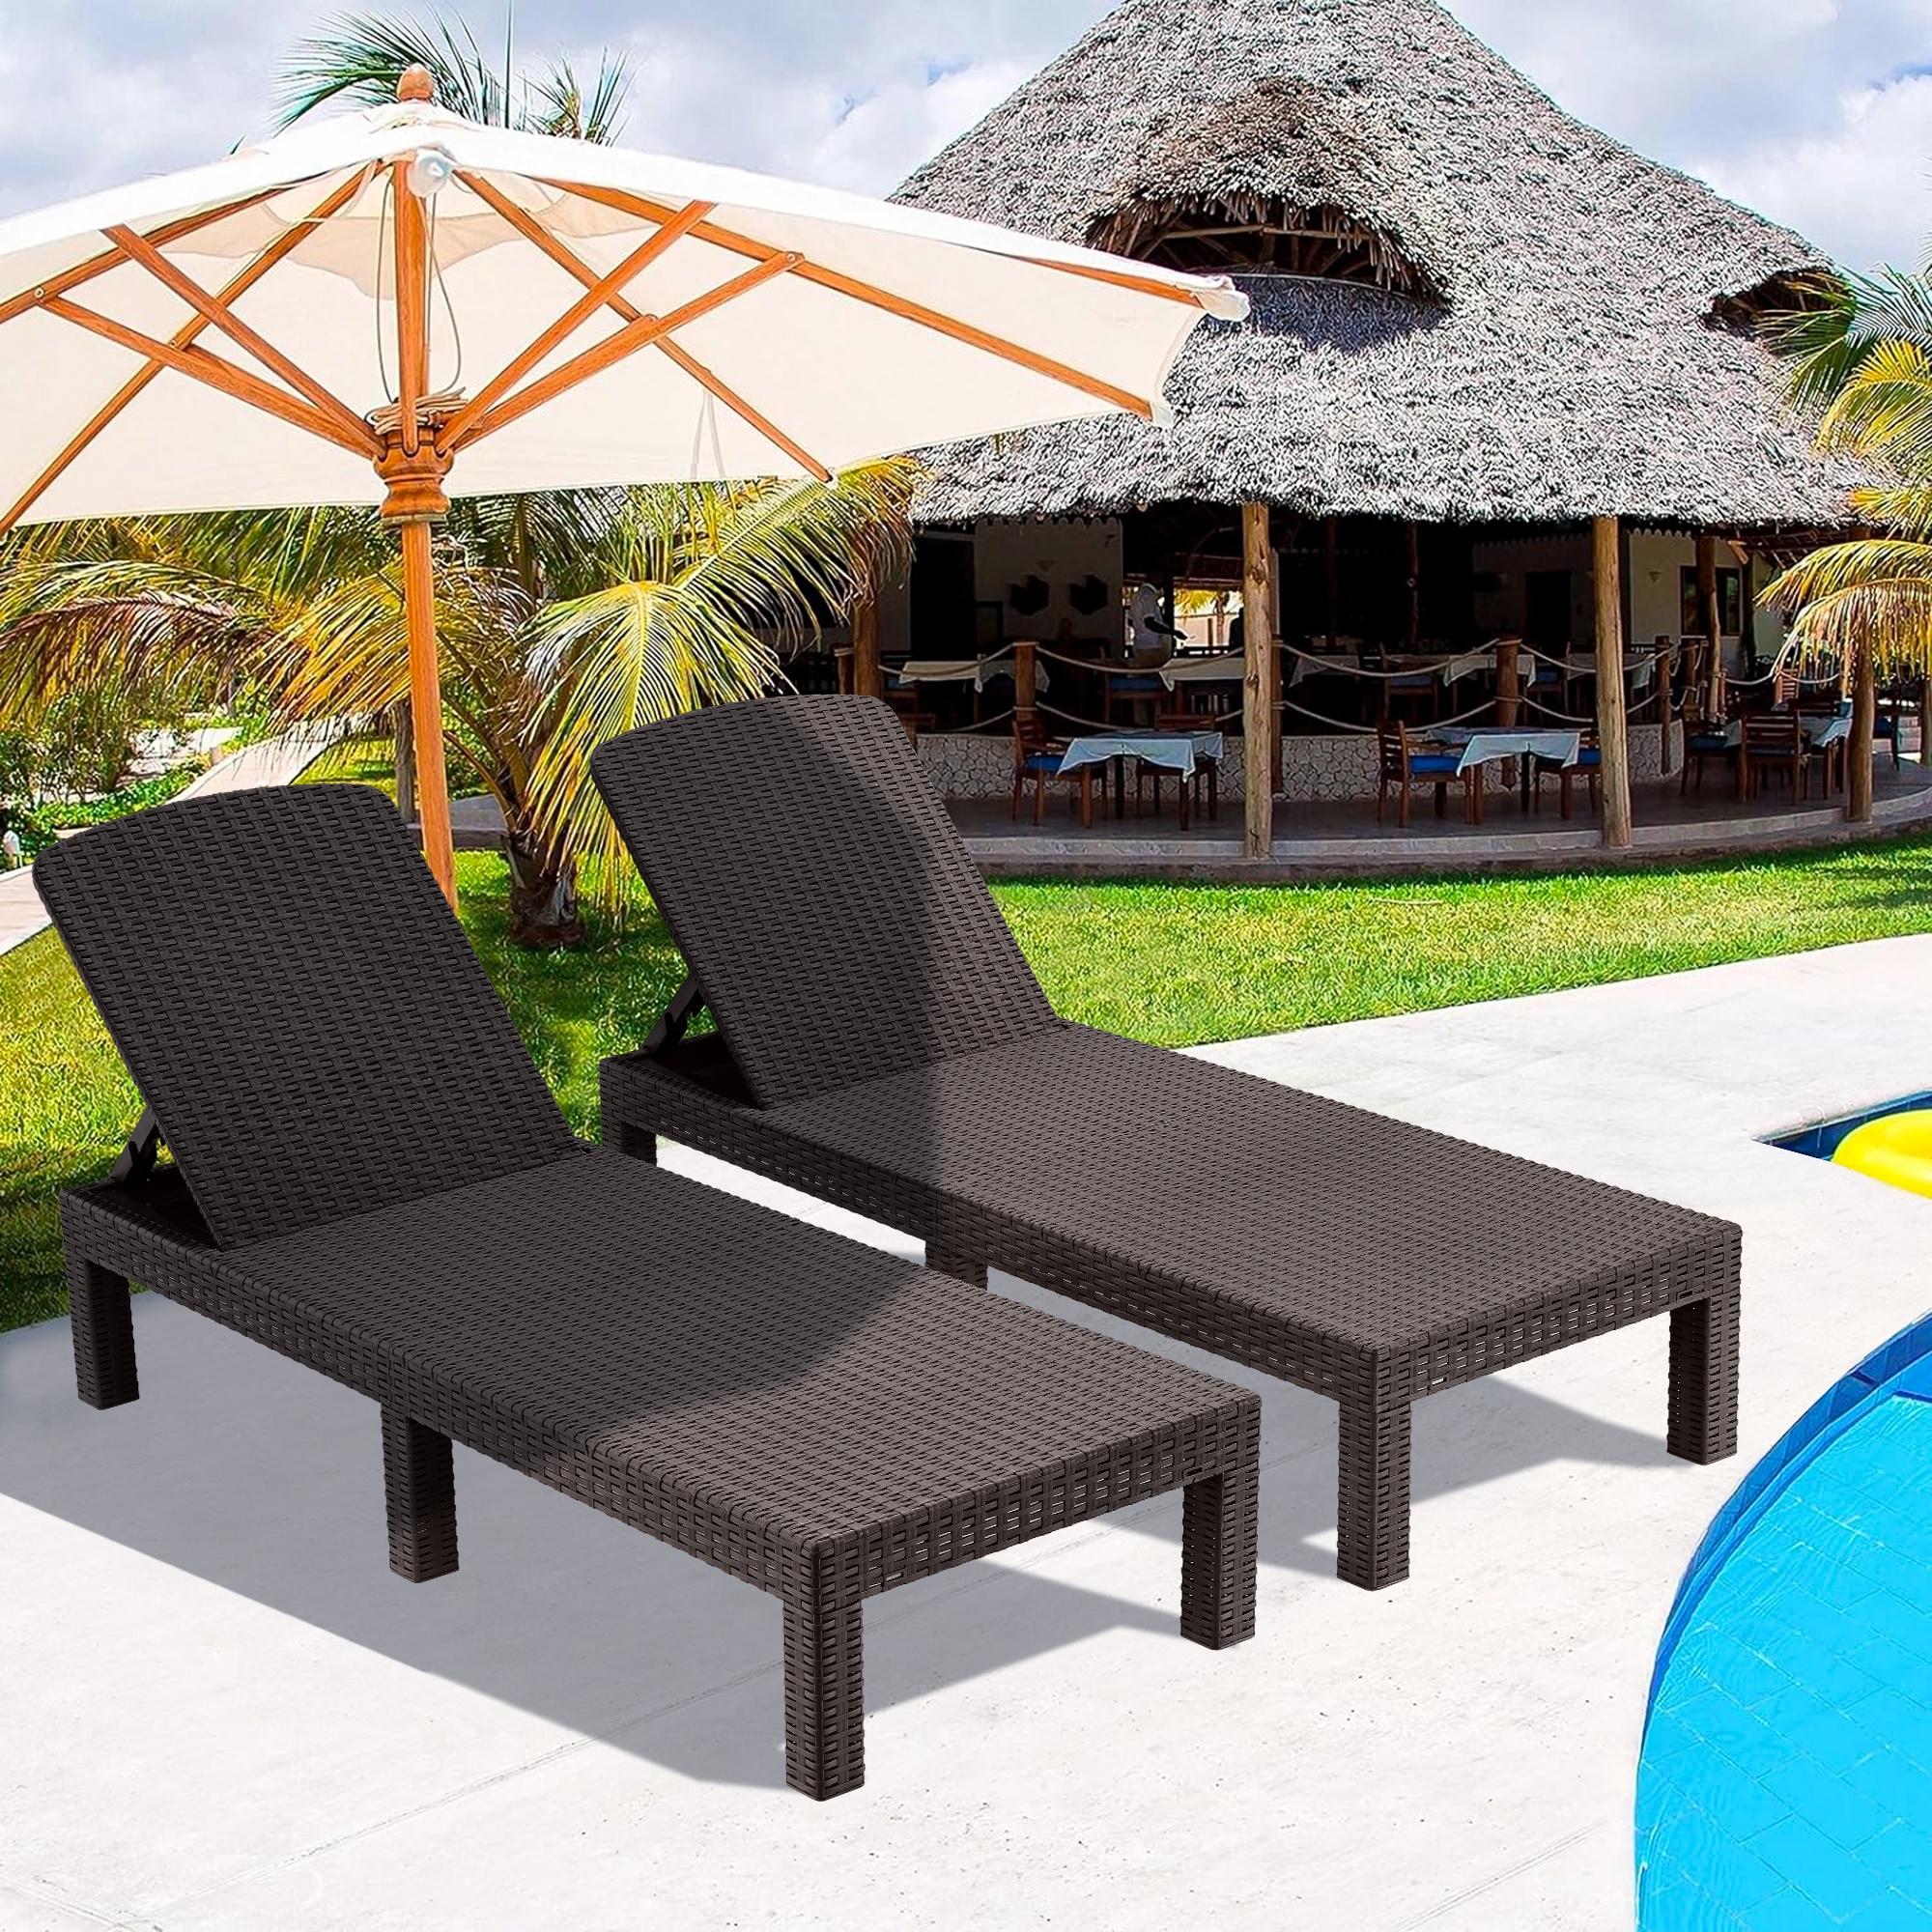 2 Piece Outdoor Chaise Lounge Set, PP Resin Adjustable Reclining Lounge Chairs, Patio Sun Loungers for Poolside Porch Backyard Garden, Espresso - image 3 of 10